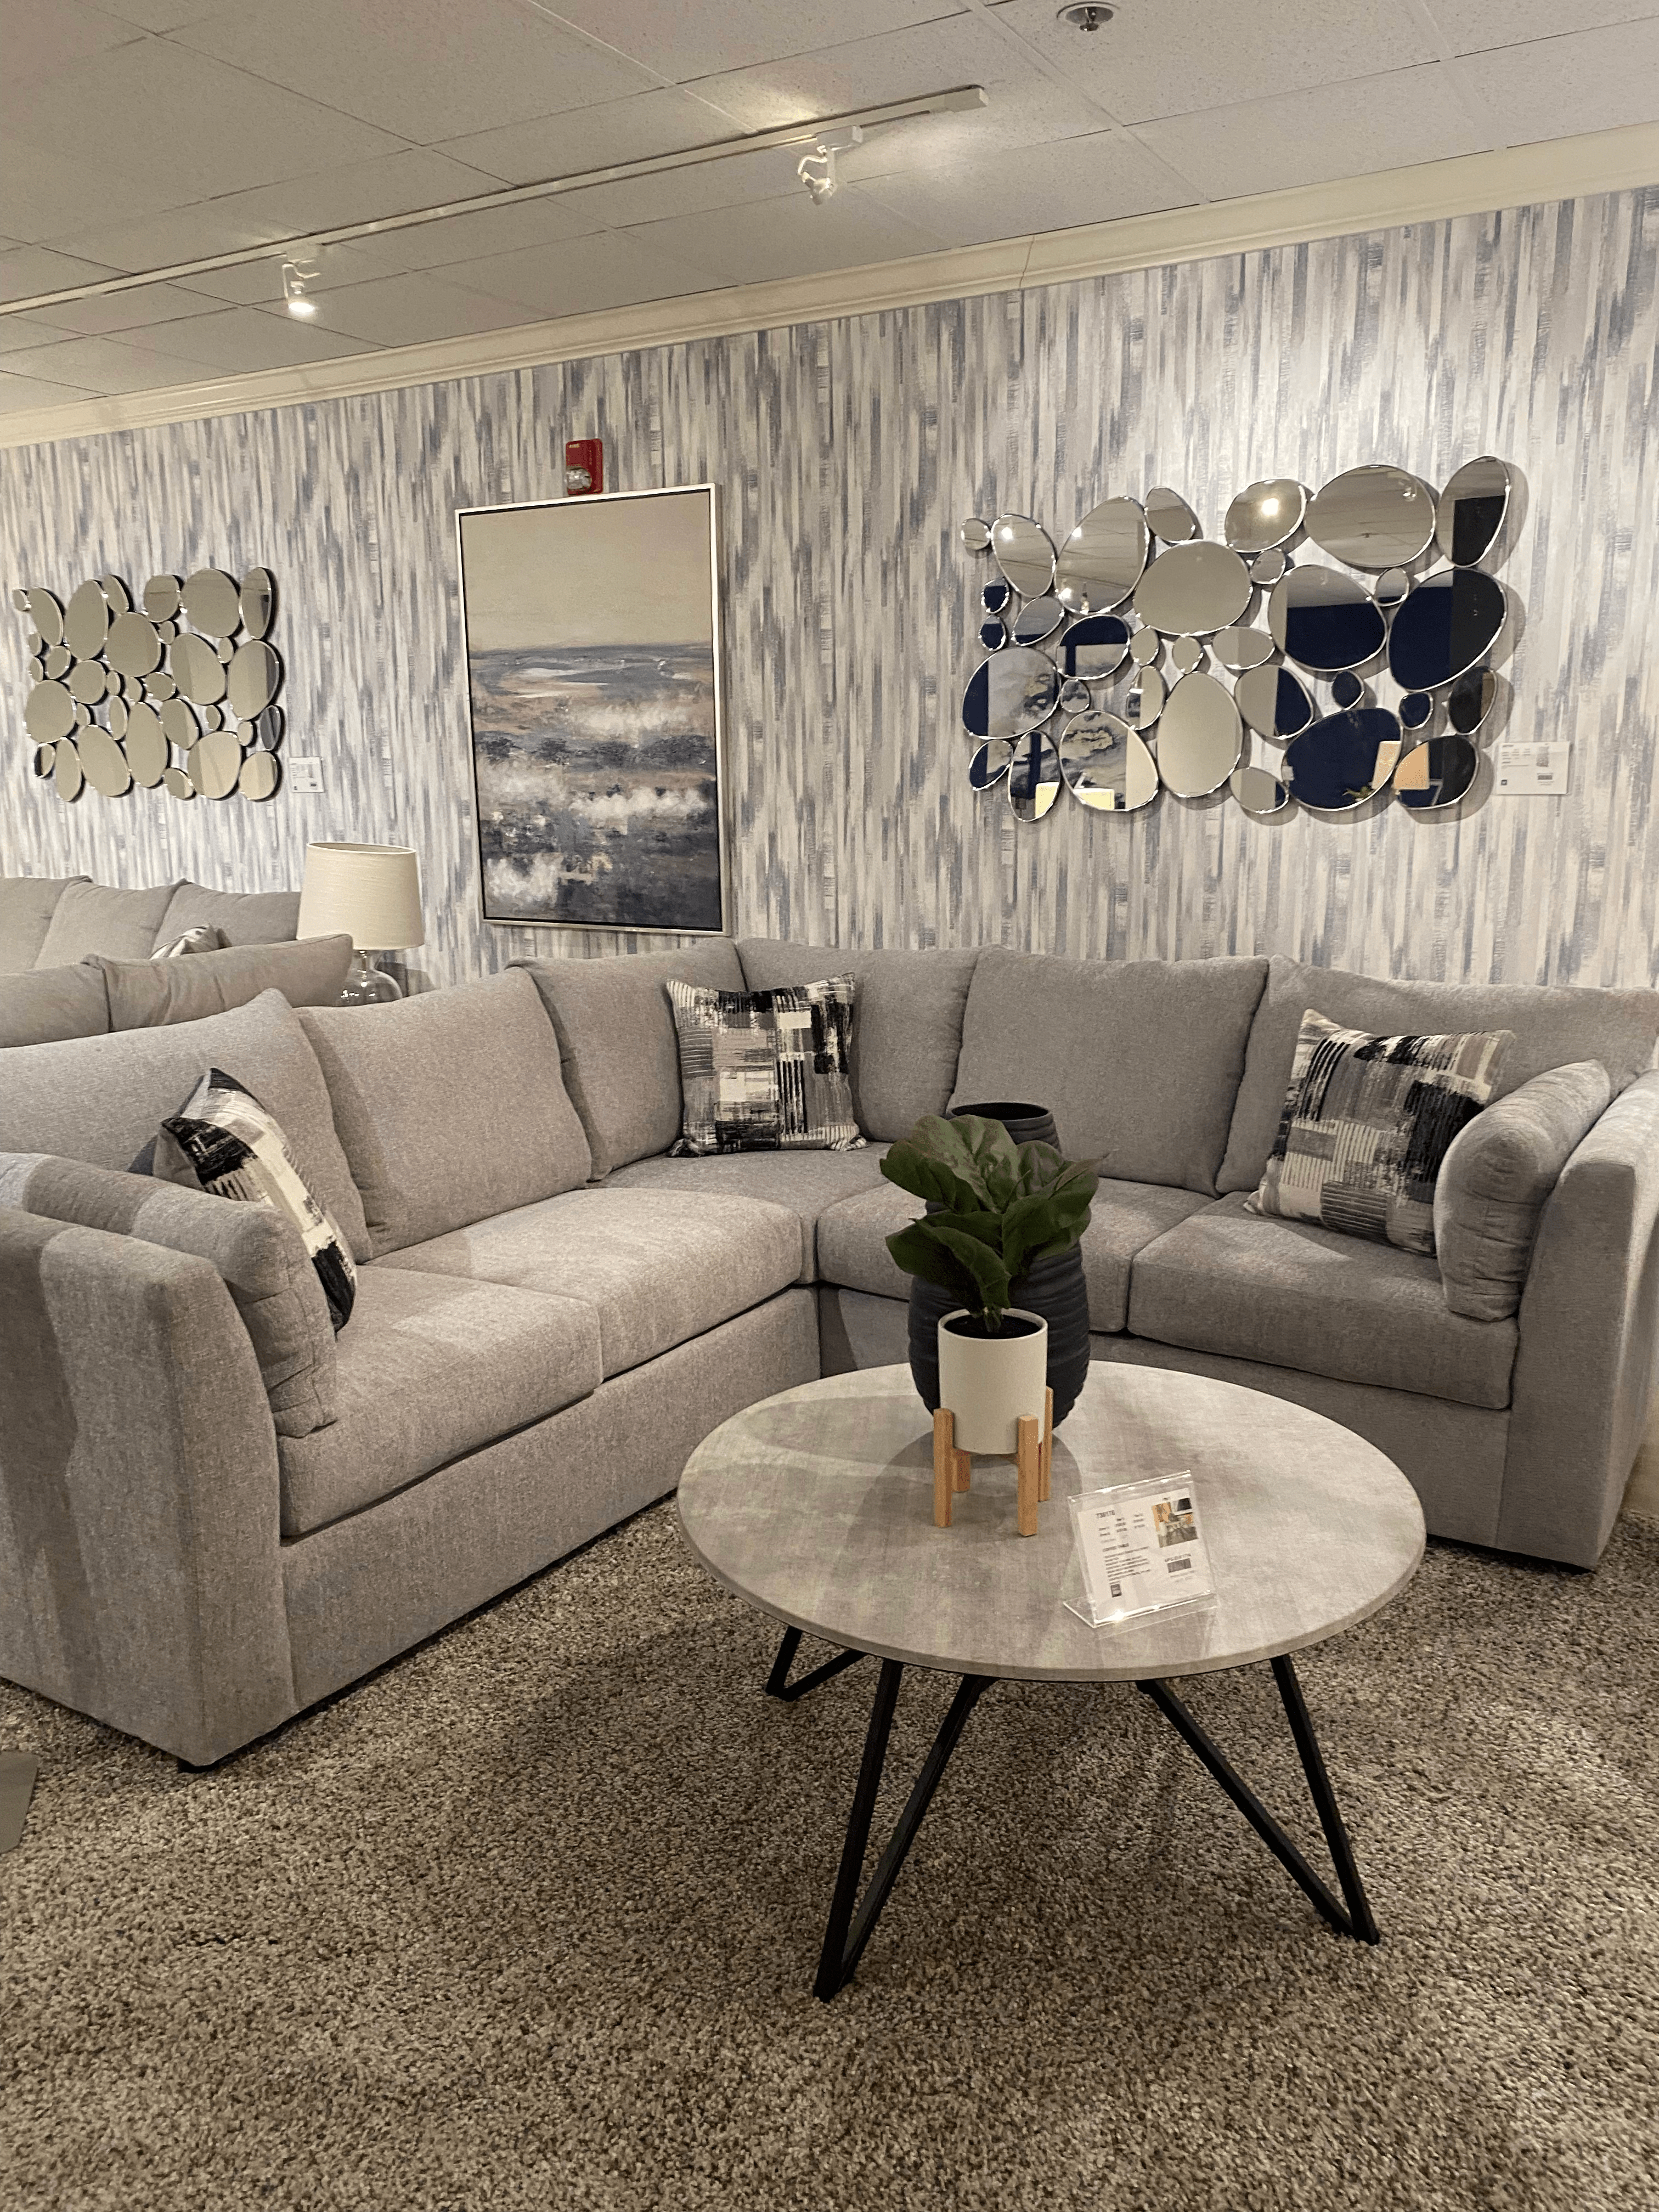 Image of interior design decor from High Point Market